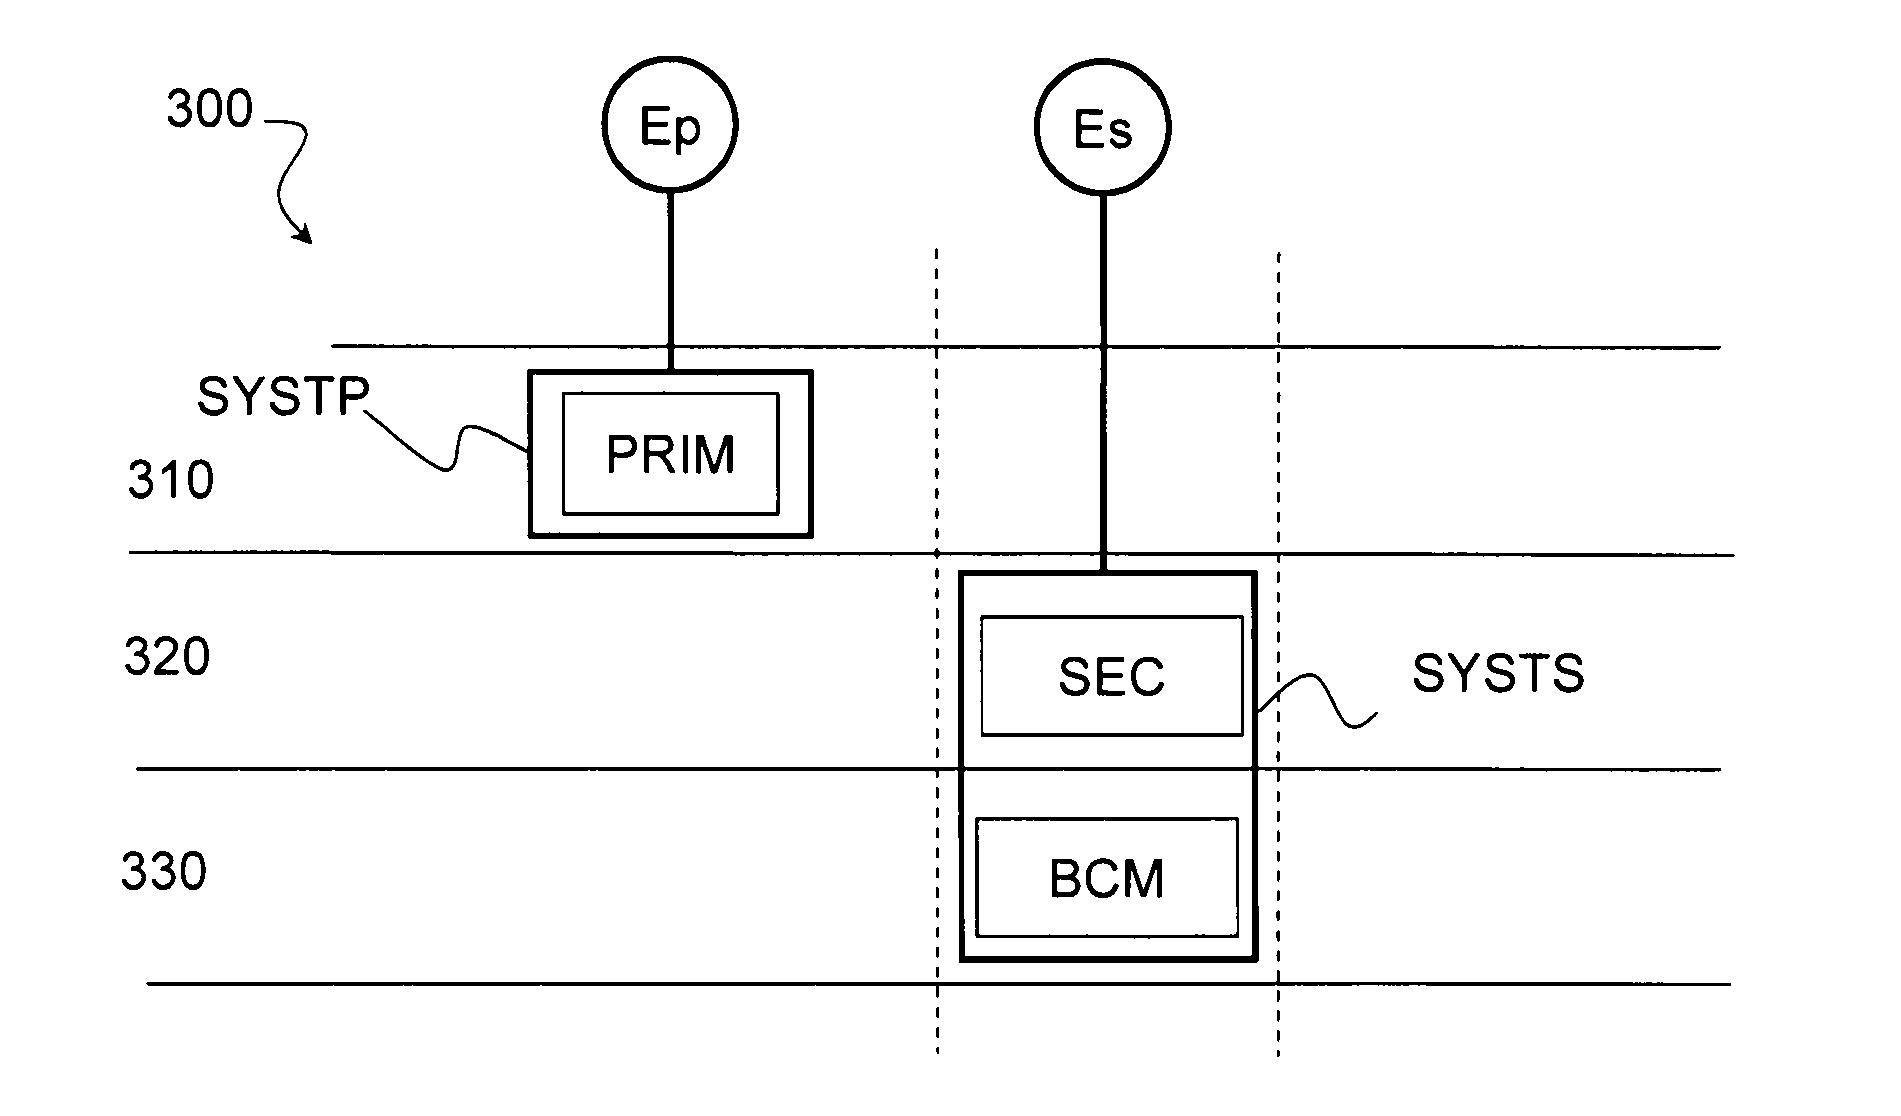 Distributed flight control system implemented according to an integrated modular avionics architecture